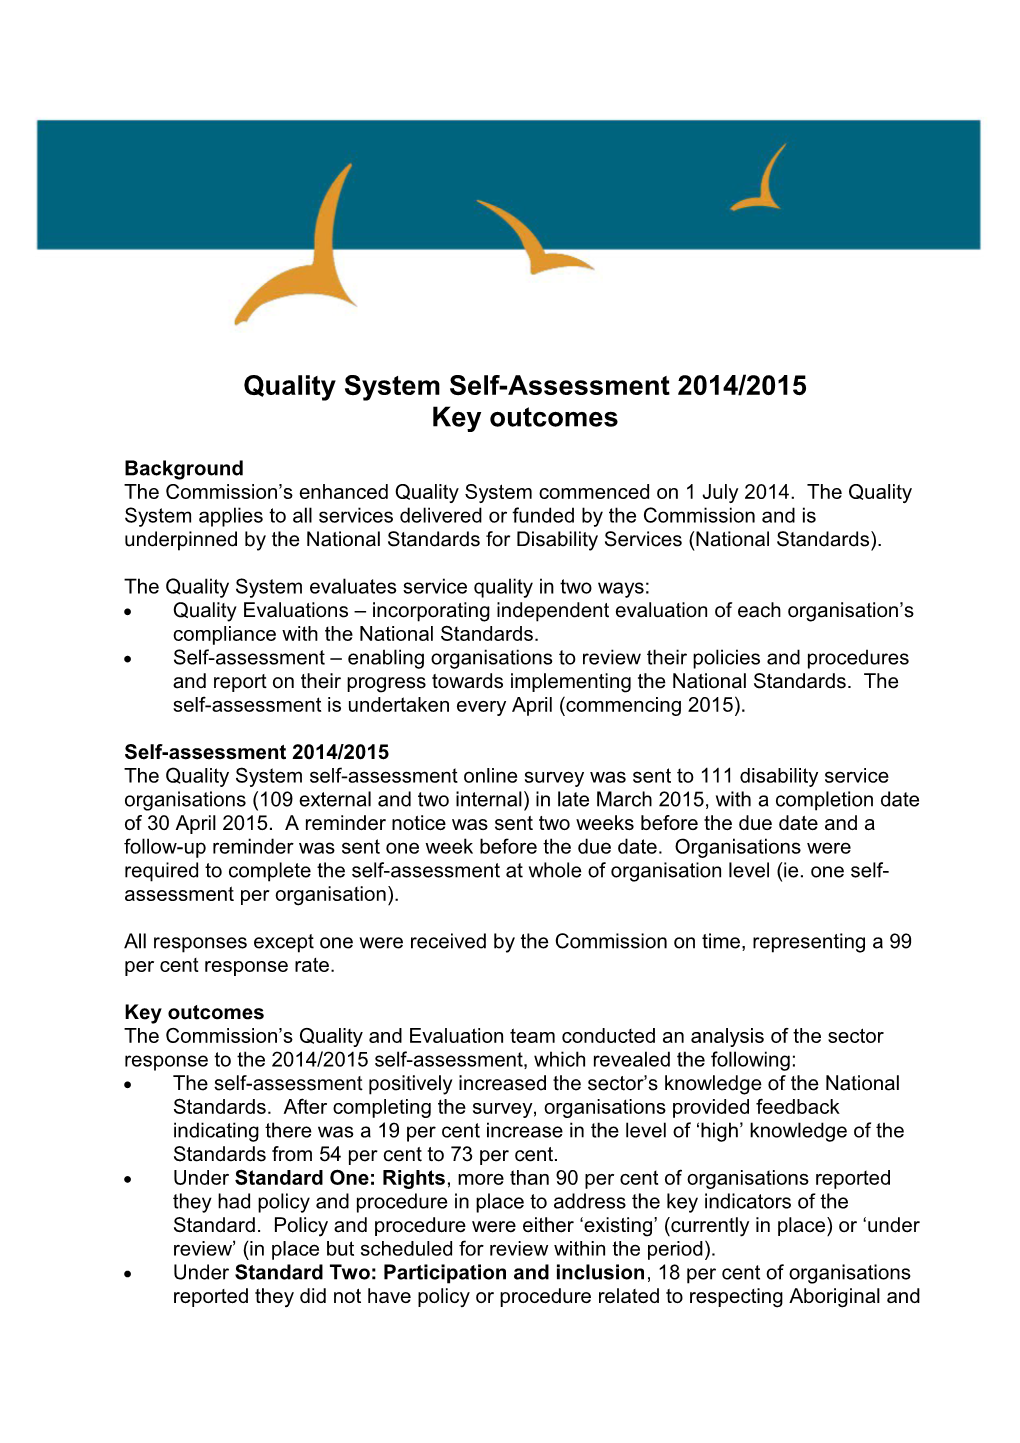 Quality System Self-Assessment 2014/2015